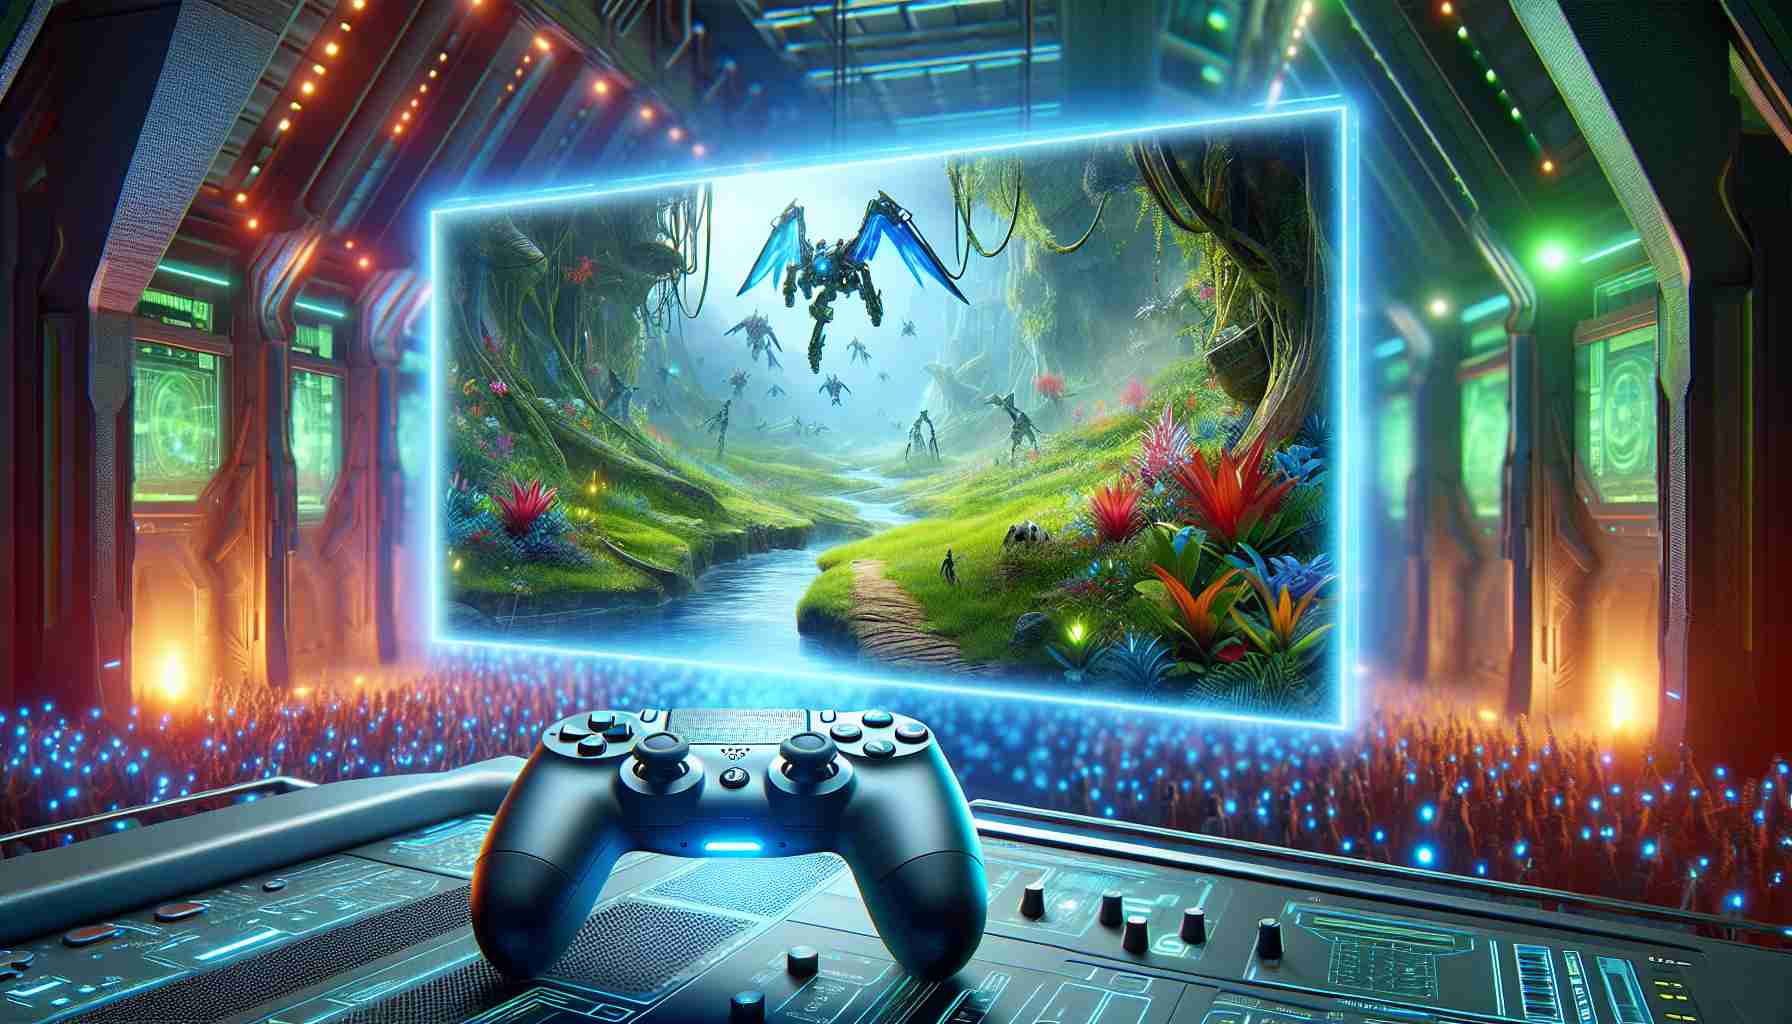 Generate a high-definition image illustrating a transformative gaming experience with superior aesthetics. Envision a widescreen view of an advanced gaming console controller in the foreground with radiant light reflecting off its buttons, akin to a futuristic environment. Also showcase a visually captivating game scene on a large, flat-screen monitor in the background featuring a lush, fantastical landscape thriving with vibrant flora and fauna. Ignite the surroundings with the radiant illumination coming from the gaming equipment suggesting a wholly immersive gaming ambiance.